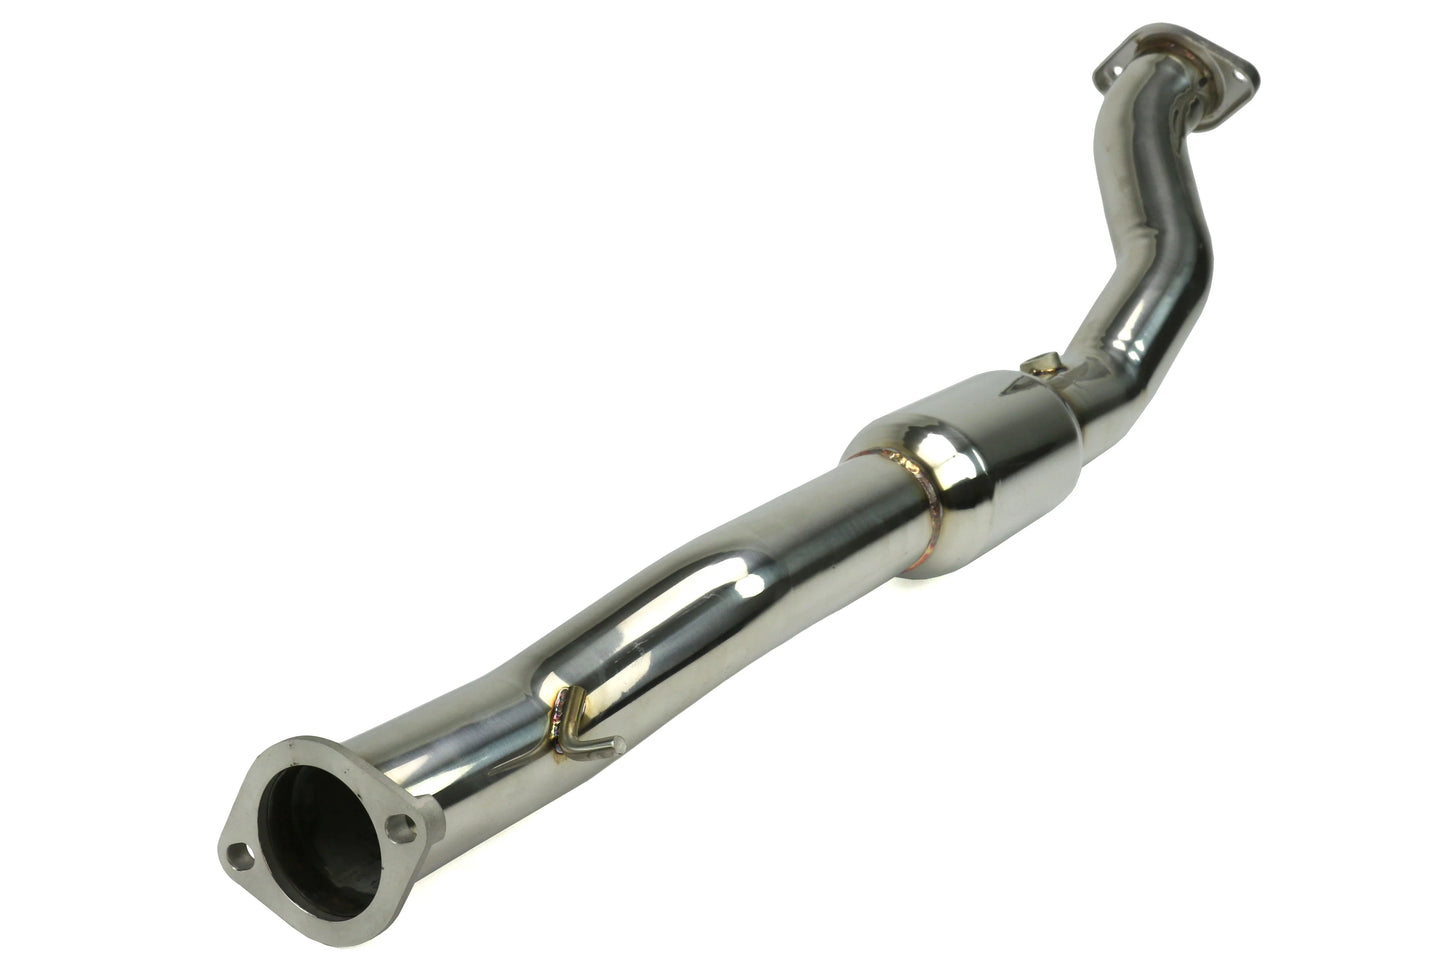 Down Pipe/Front Pipe w/High Flow Cat - Mitsubishi Evo X CZ4A